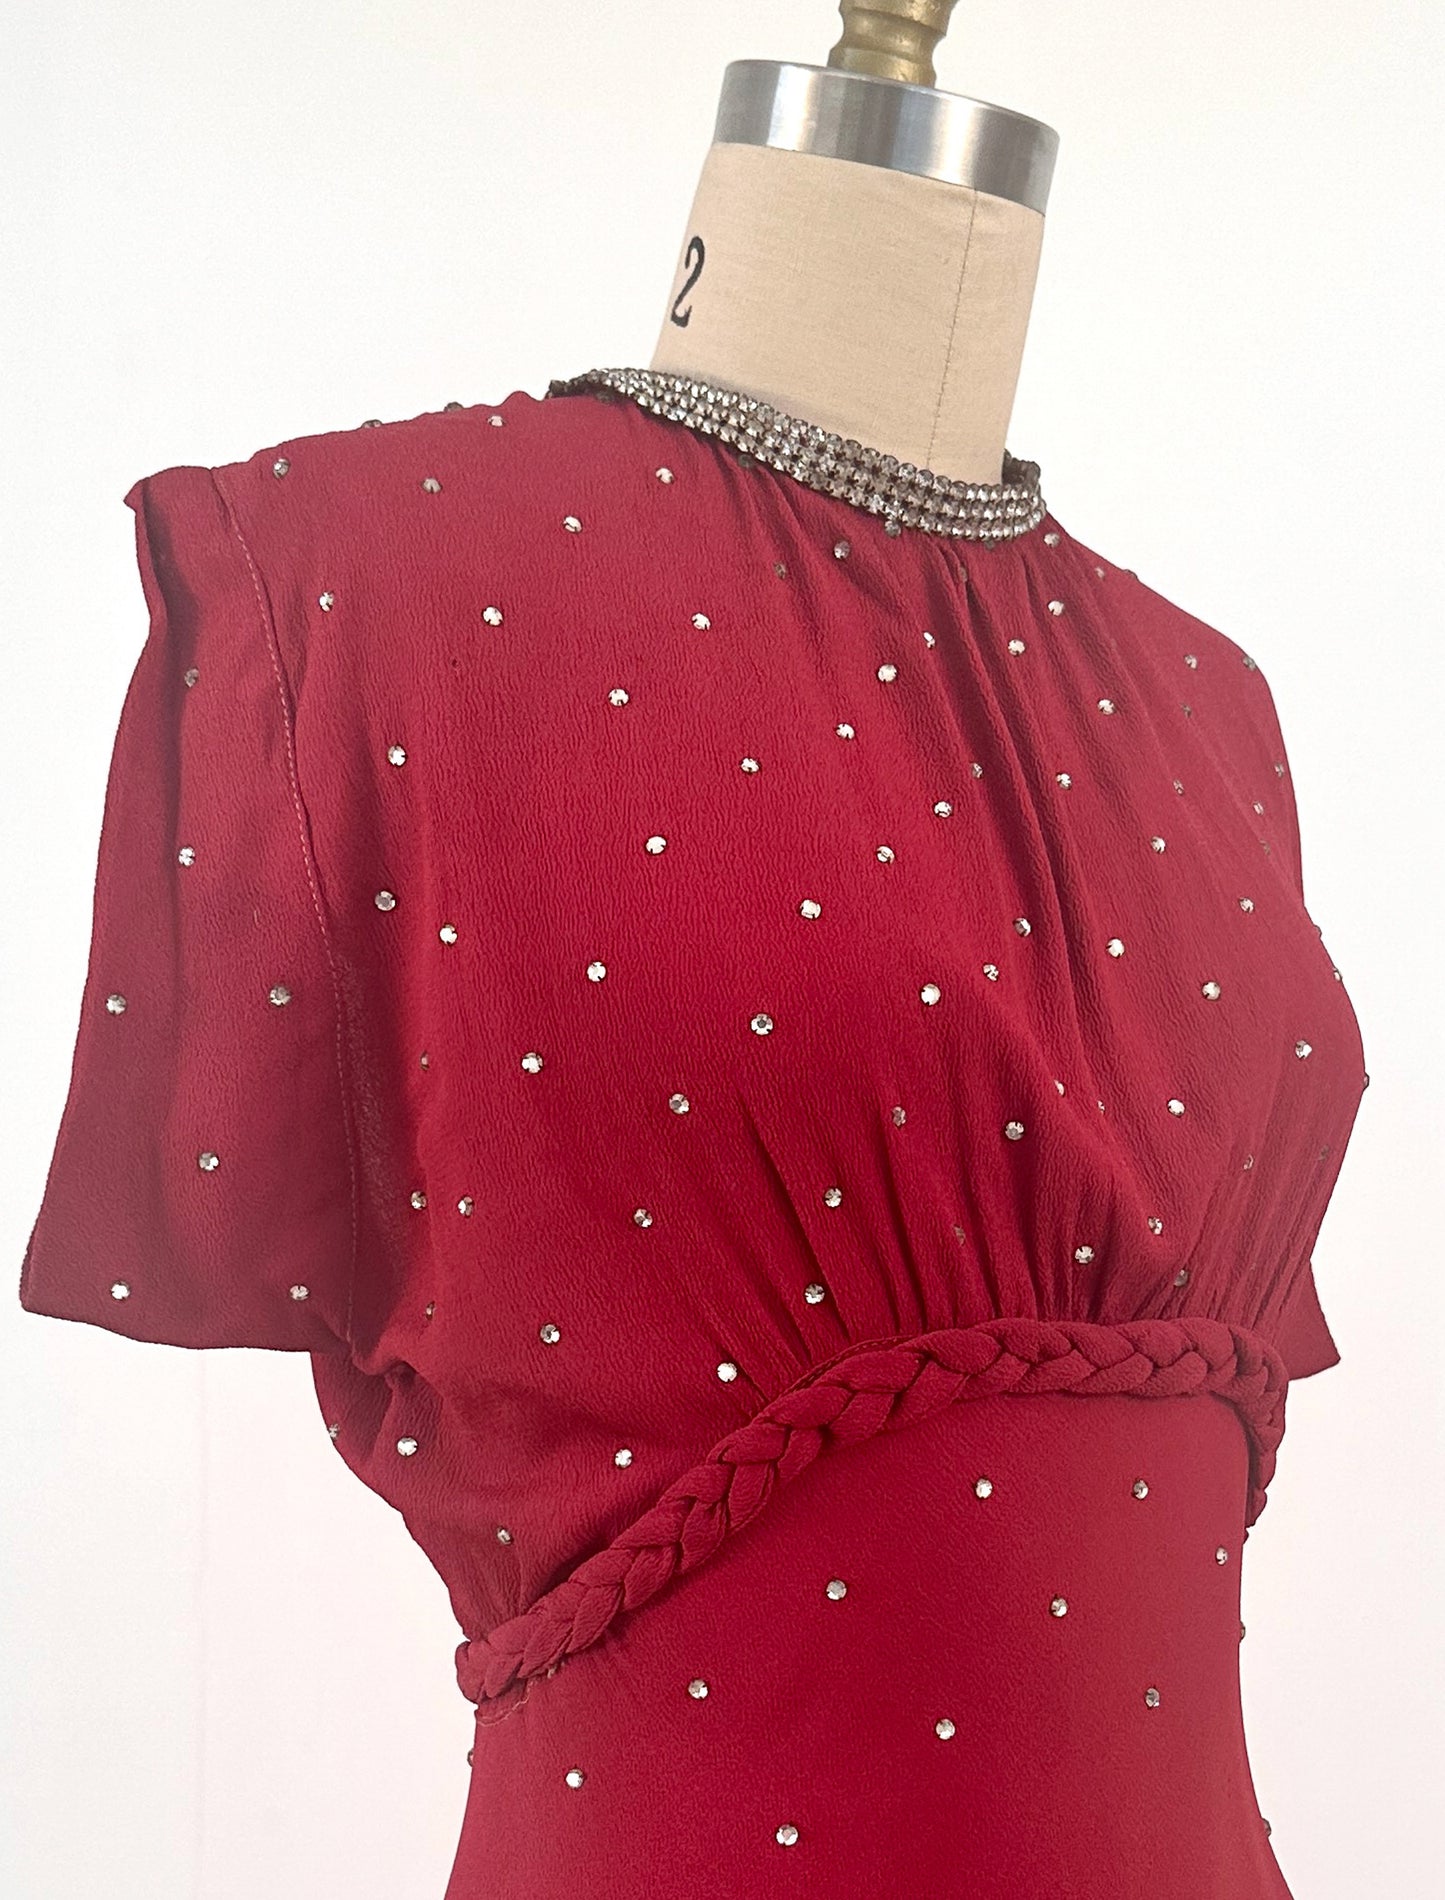 1940s Crimson Red Crepe Gown with Rhinestone Accents / Waist 26